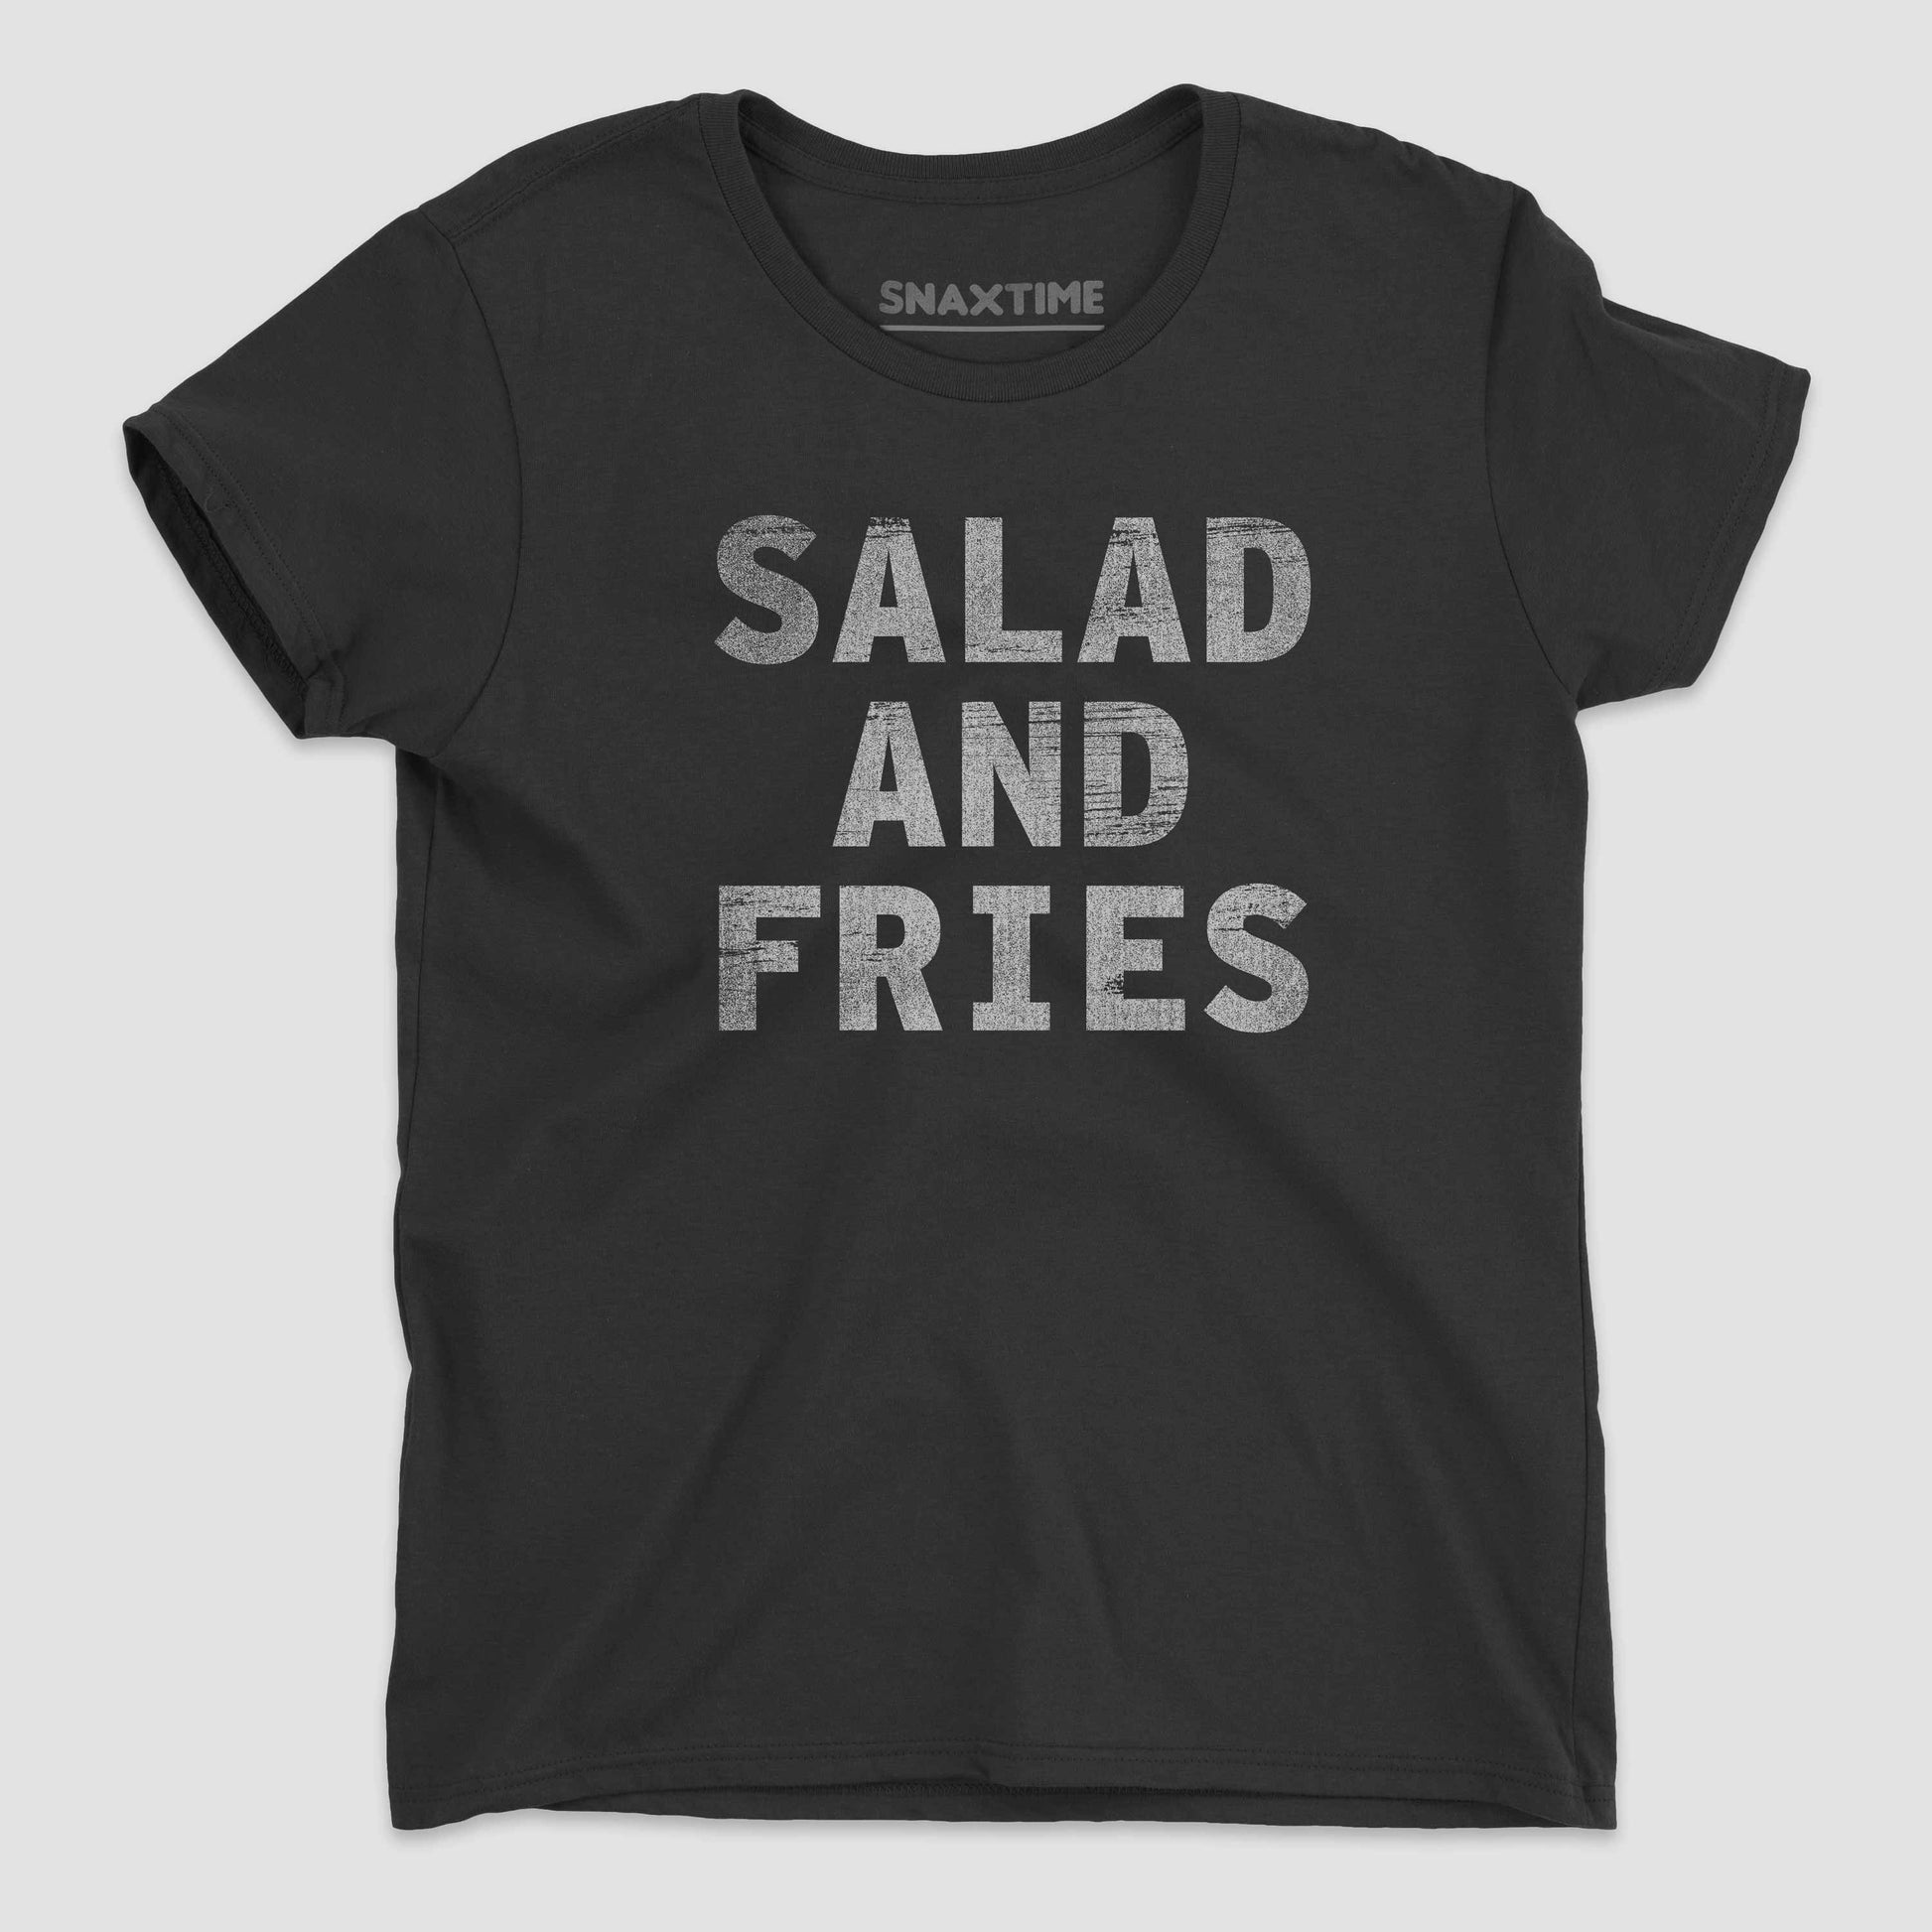 Black Salad and Fries Women's Graphic T-Shirt by Snaxtime